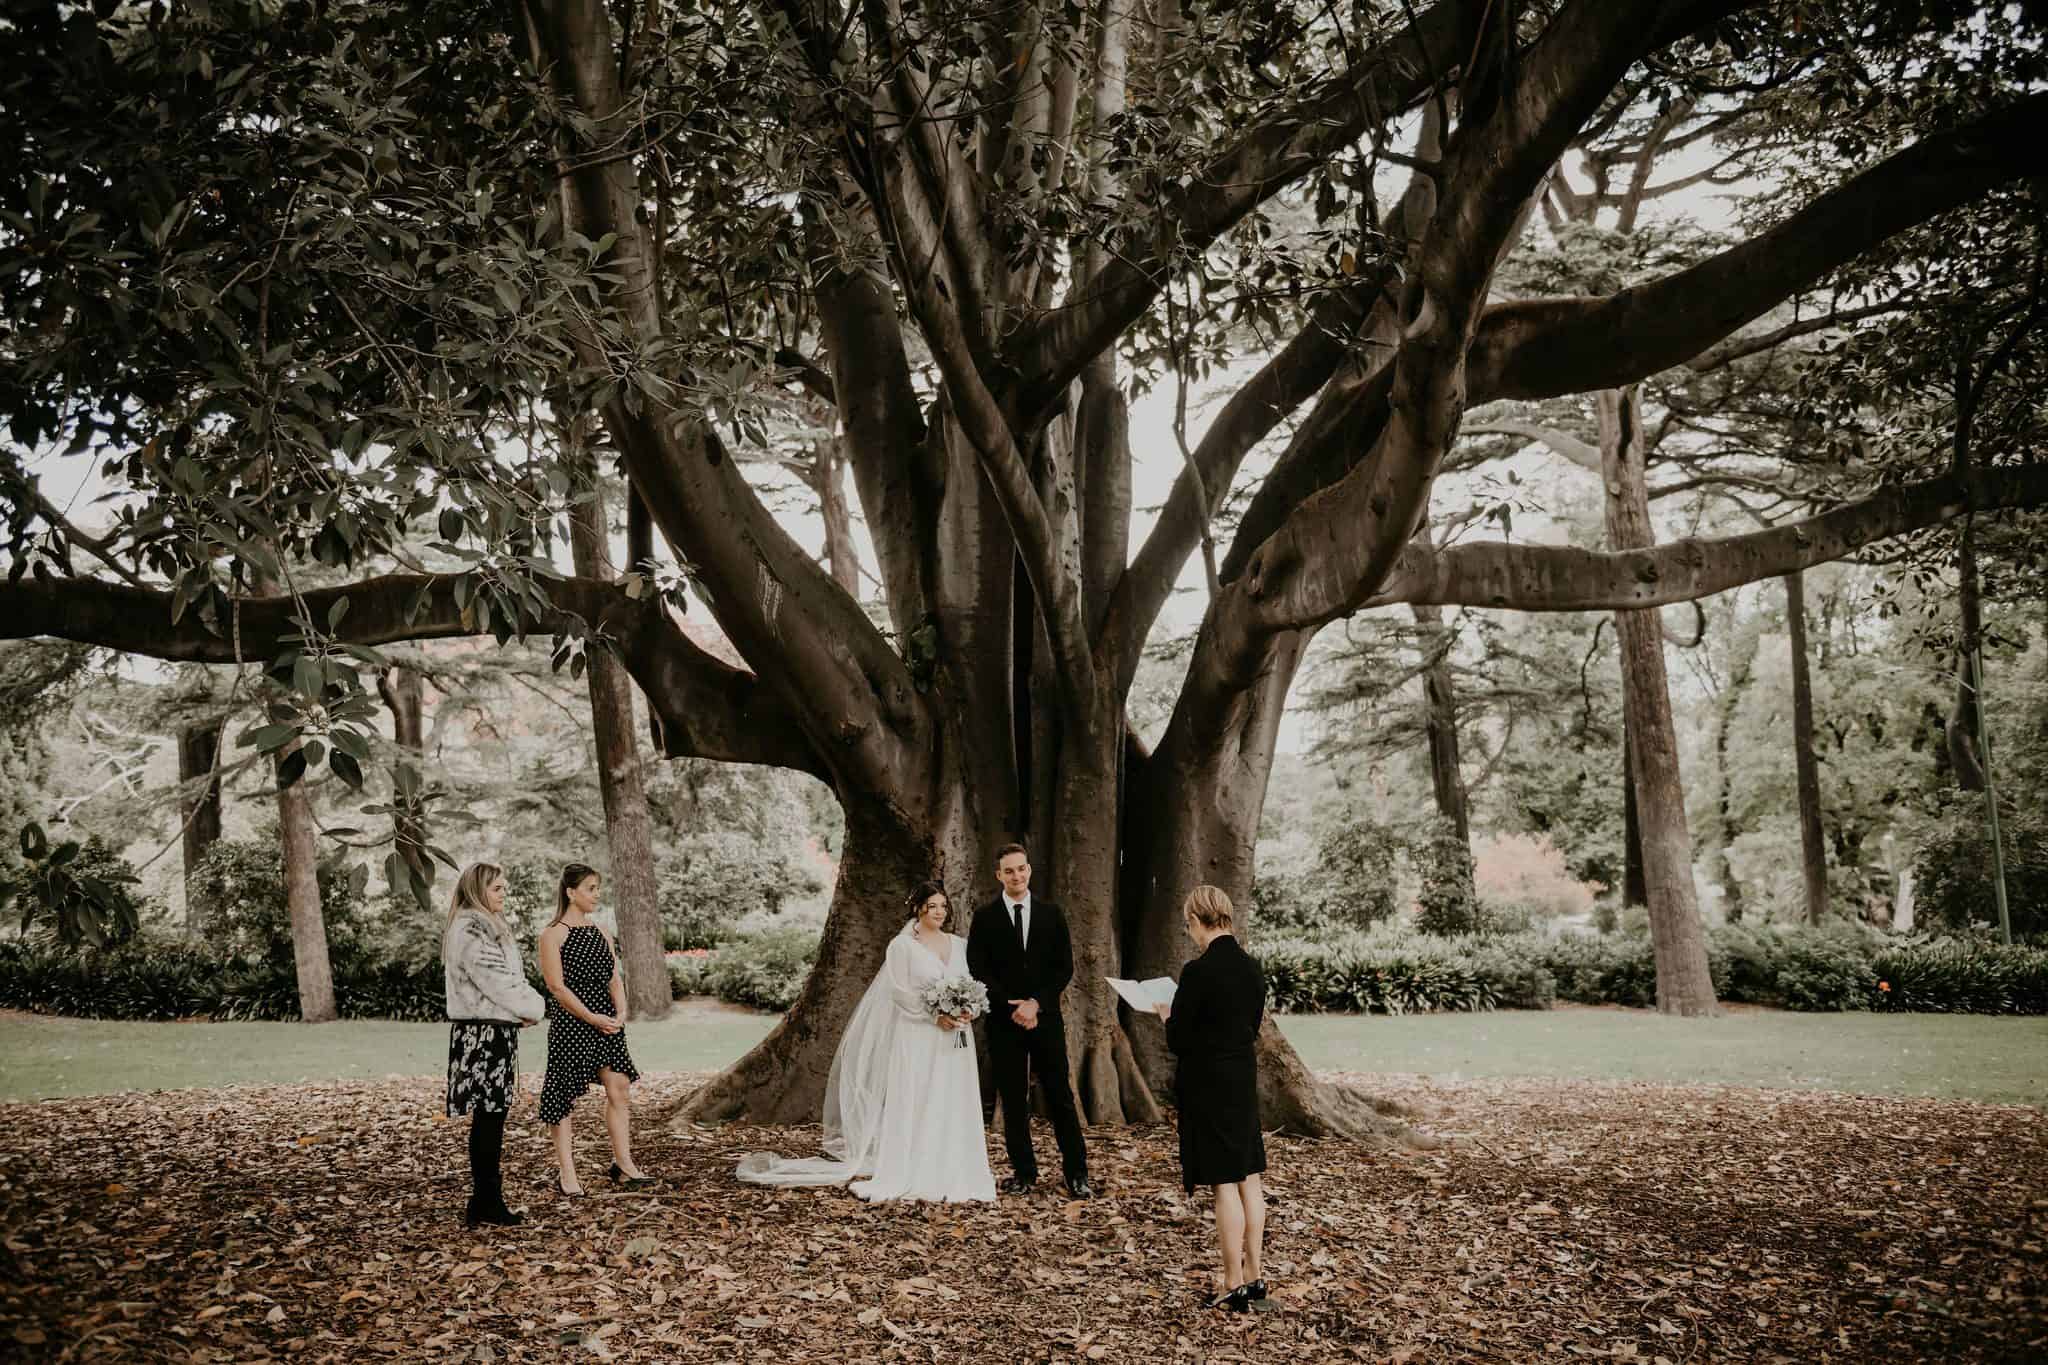 Elopement under fig tree Fitzroy Gardens Melbourne Ceremony and Photography - simple yet elegant ceremony which can be personalised and packaged with beautiful photography you will cherish forever. Lets Elope Melbourne Celebrant Photo Elopement Packages Victoria Sarah Matler Photographer Wedding Photos